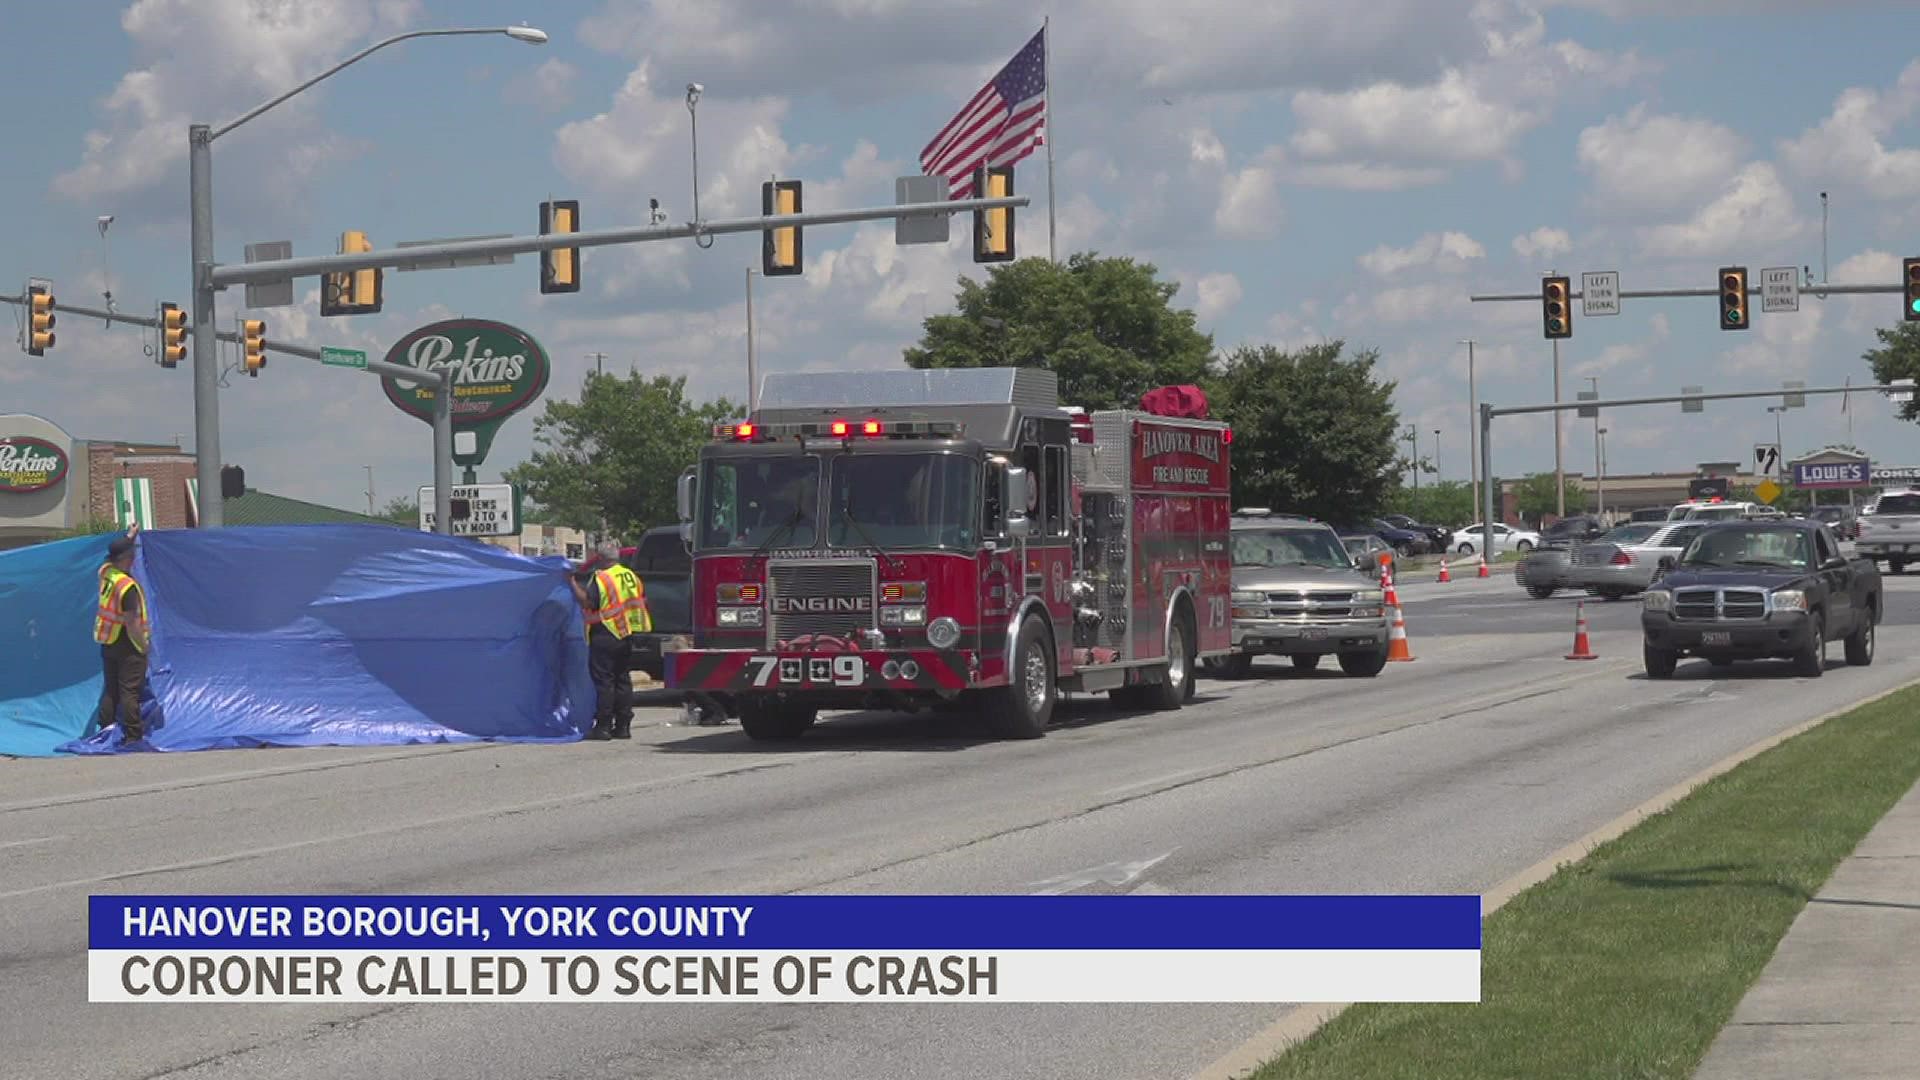 The York County Coroner was called to the scene of a 2-vehicle crash in Hanover on Saturday afternoon.